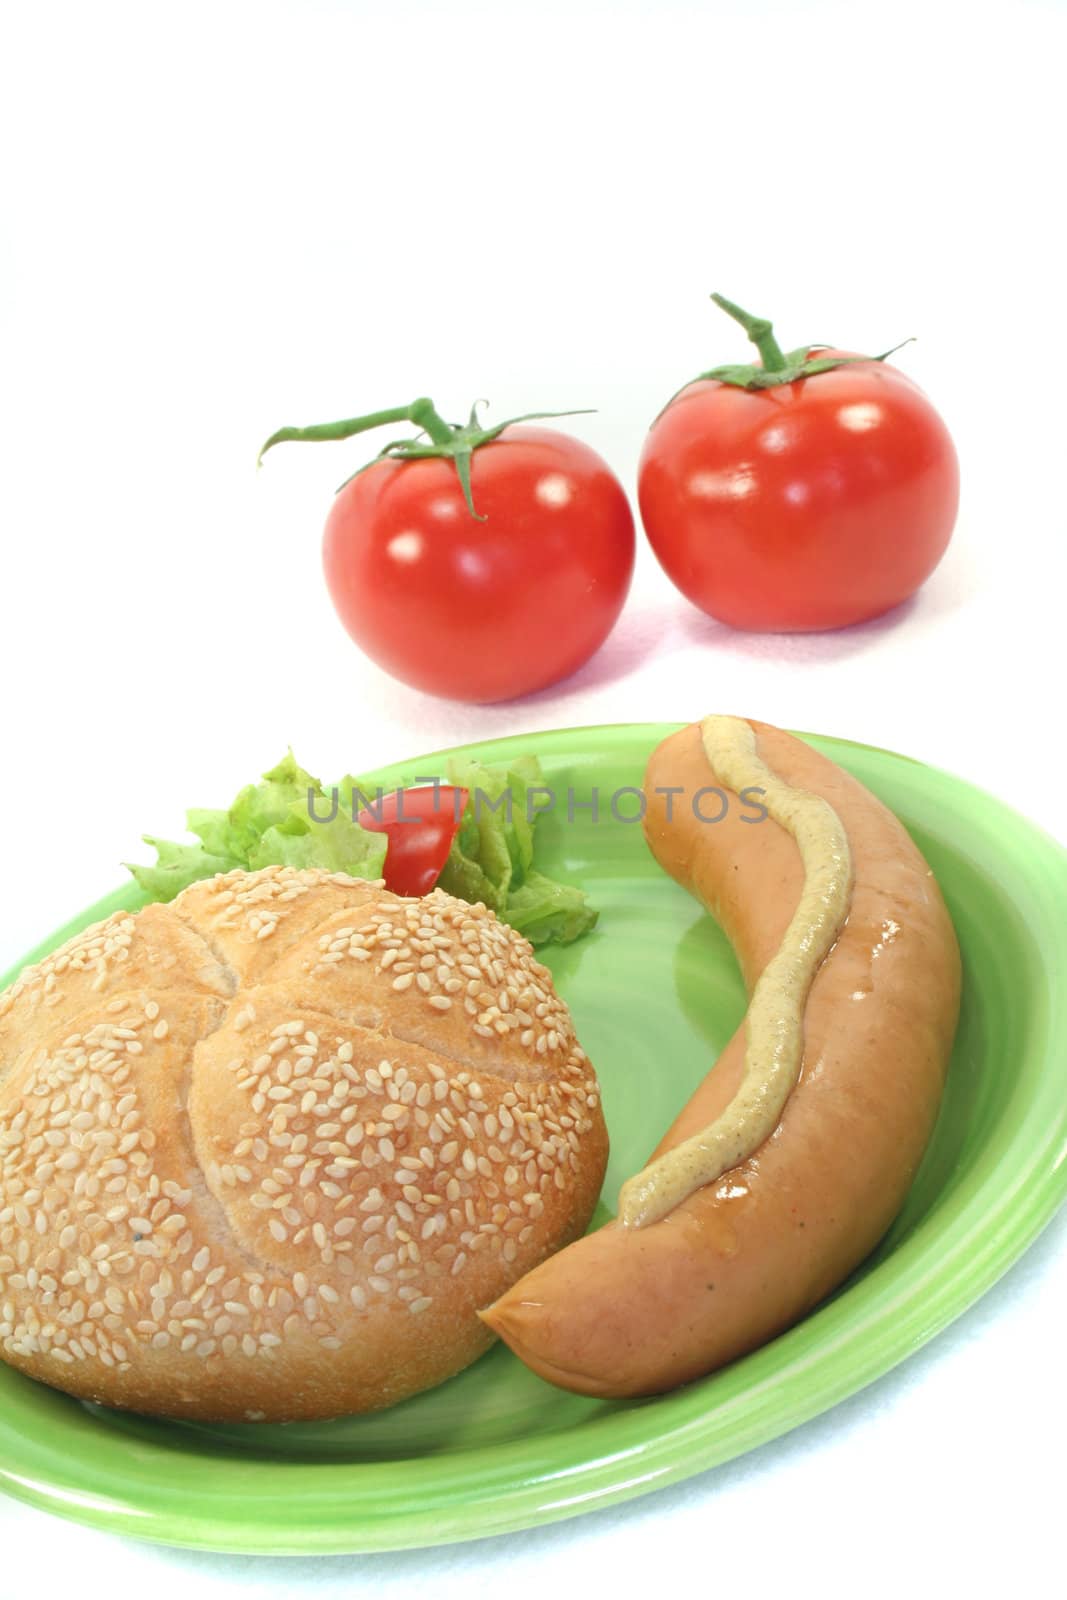 Bockwurst with bread and salad on a white background